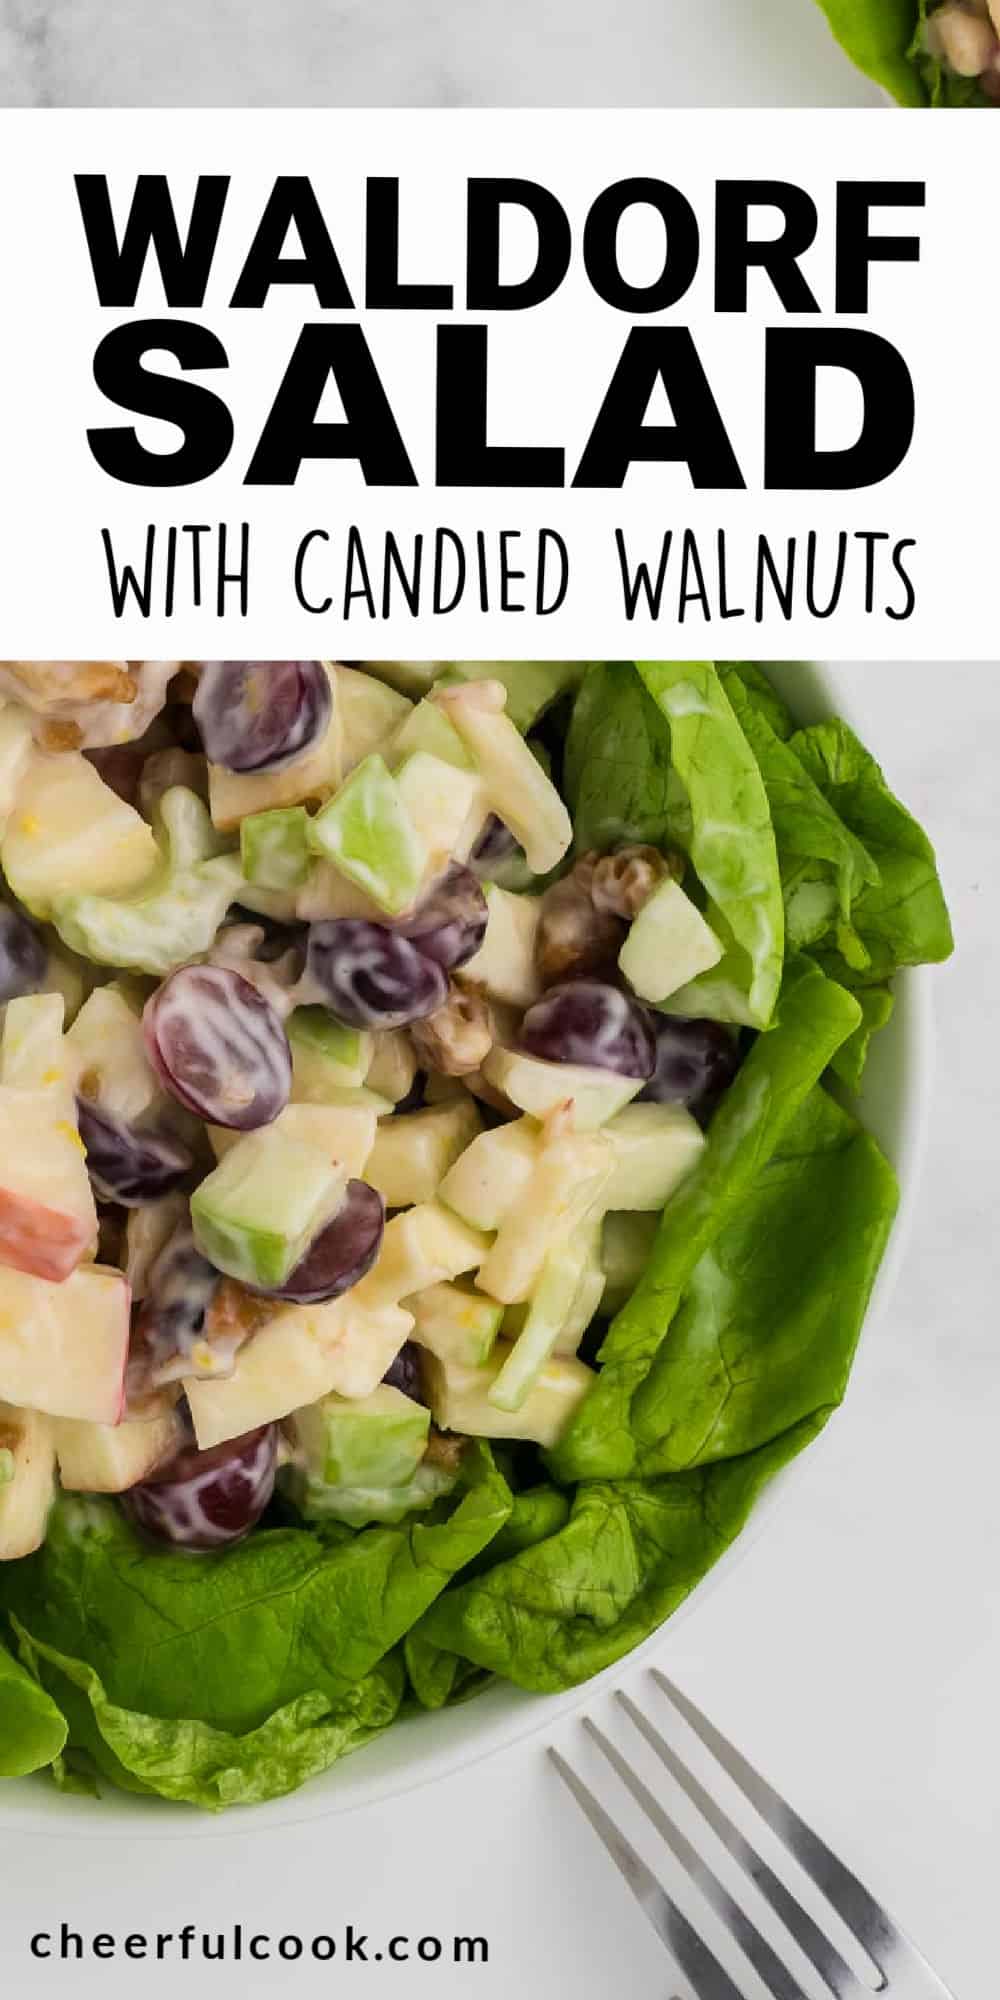 Waldorf Salad is a classic! Crisp apples, sweet grapes, crunchy celery served in a creamy dressing and topped with candied walnuts. Simple and delicious! Easy Waldorf Salad Recipe | Fruit and Nut Salad | Candied Walnut Fruit Salad #cheerfulcook #salad #waldorf cheerfulcook.com via @cheerfulcook